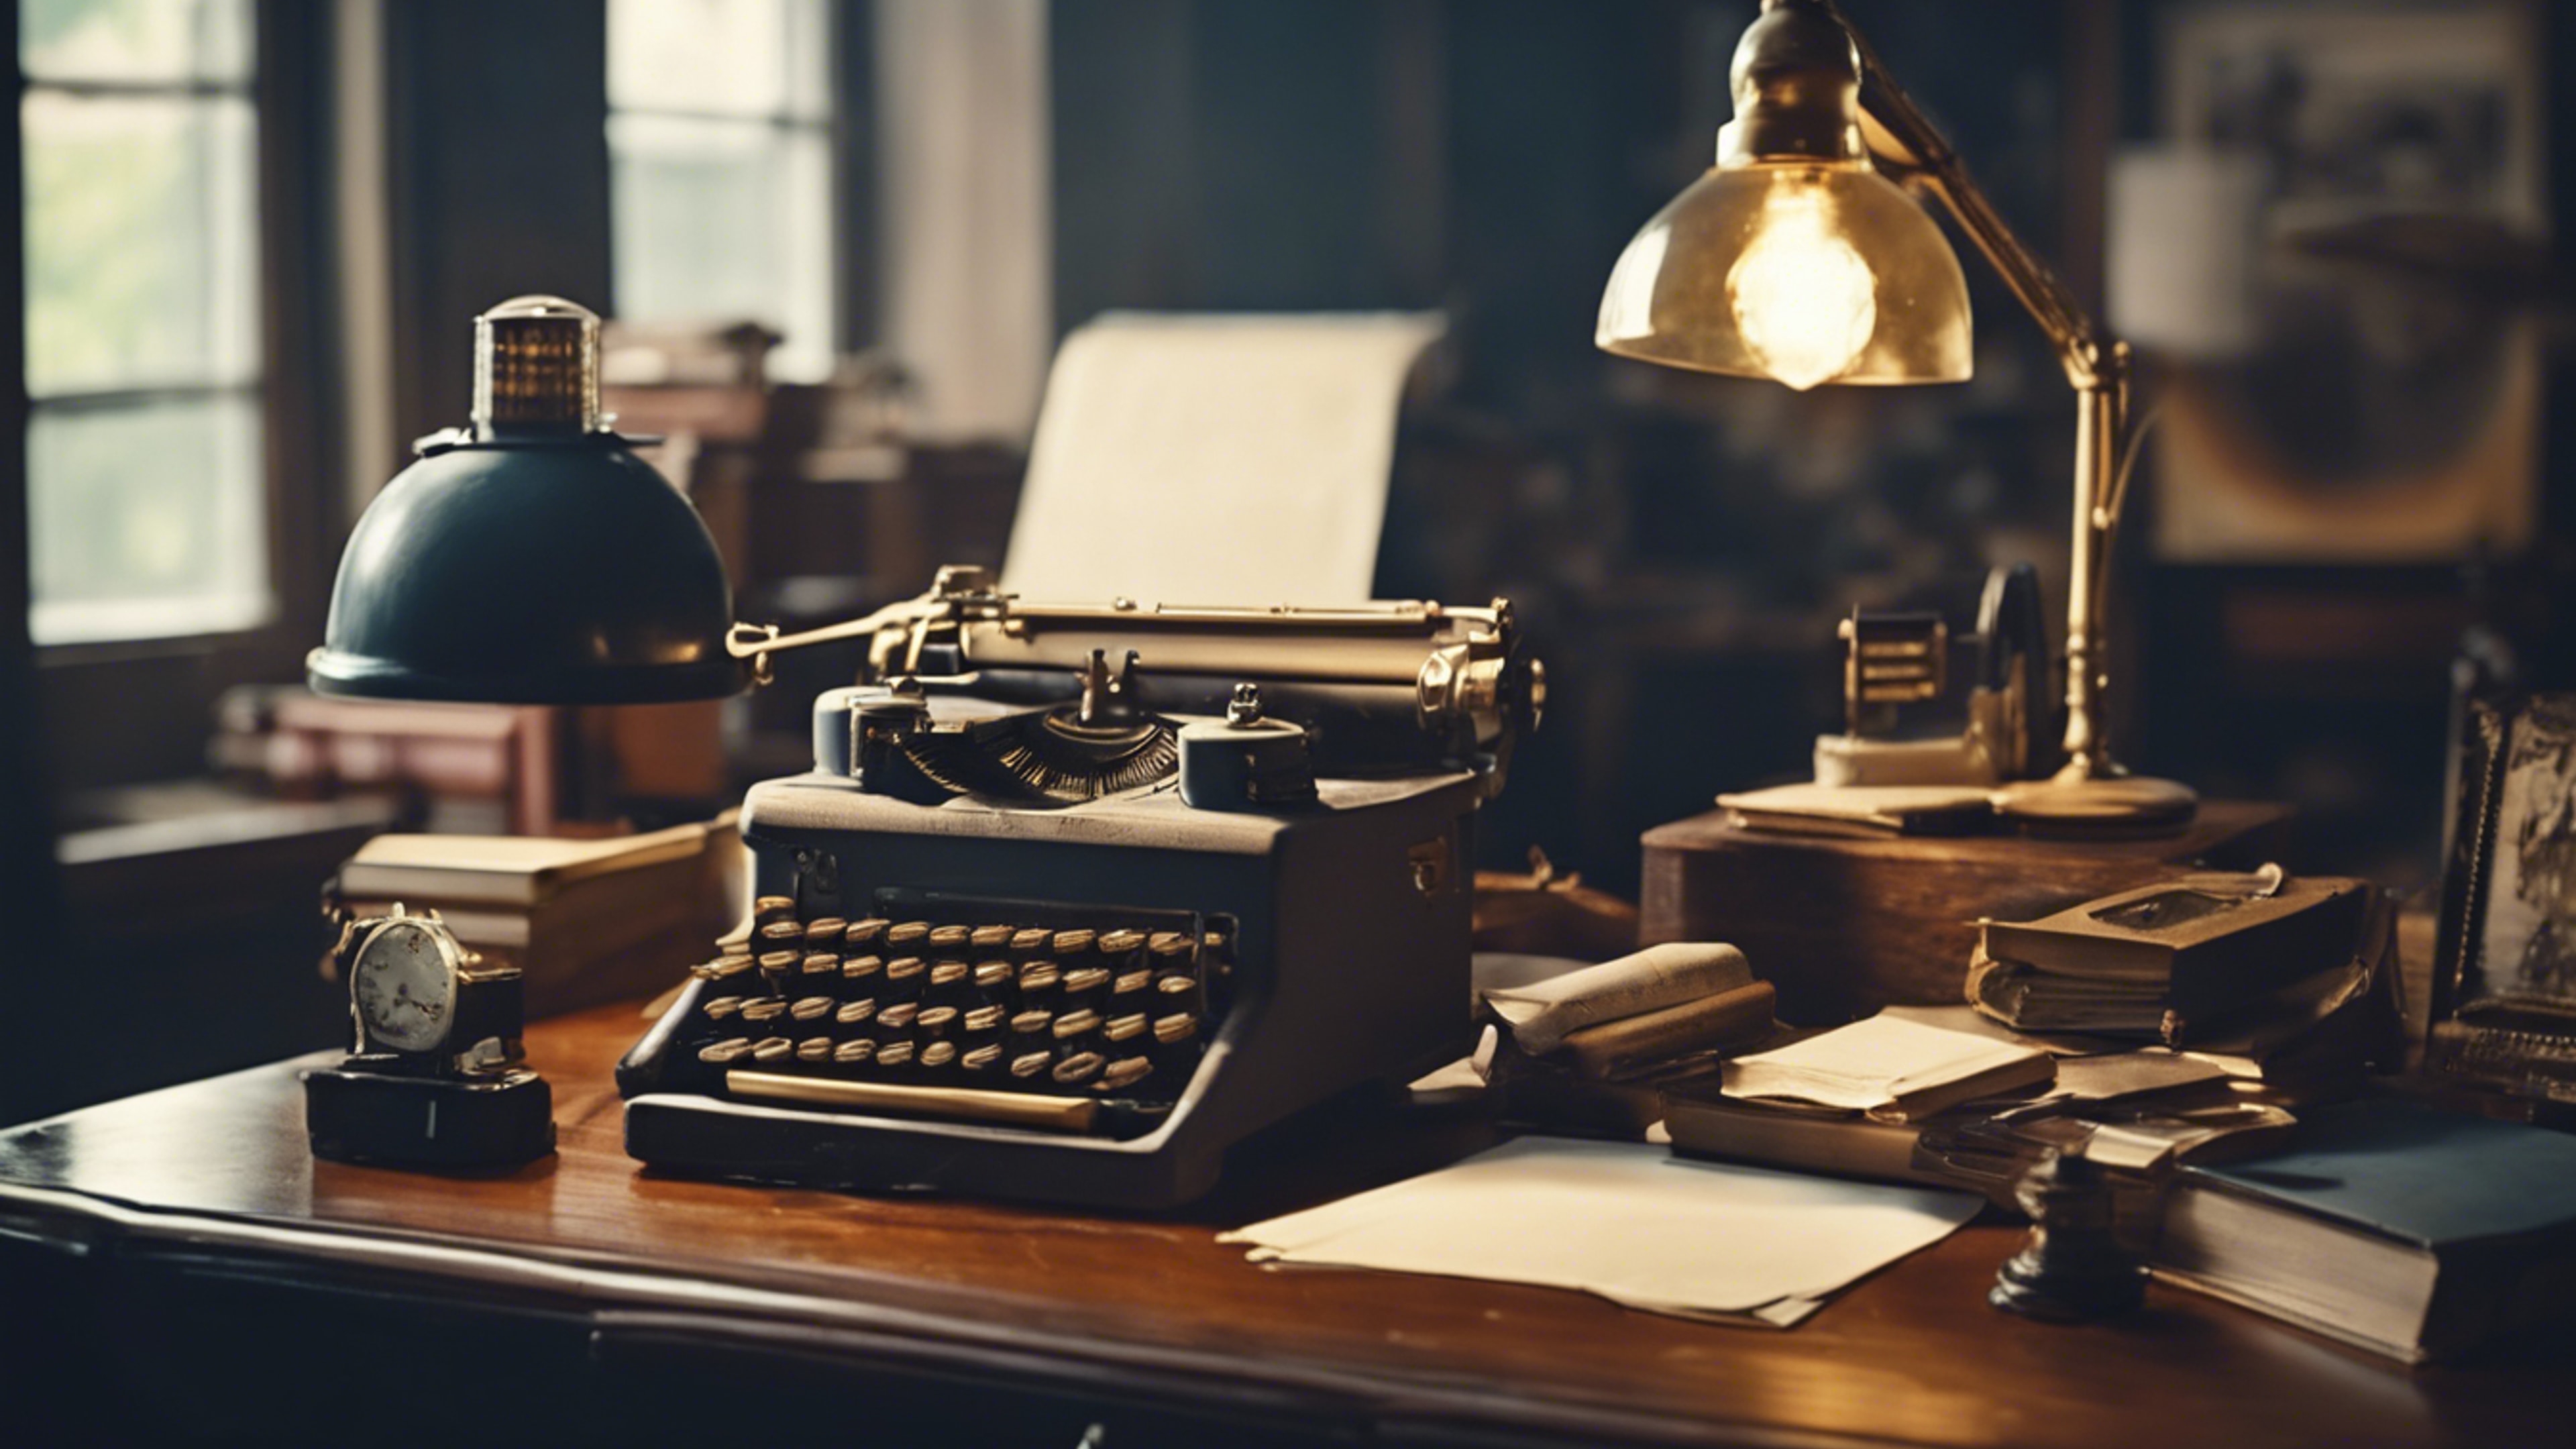 An old-fashioned navy office with a wooden desk, a typwriter and a vintage lamp. ផ្ទាំង​រូបភាព[8cb58867731e4823a50e]